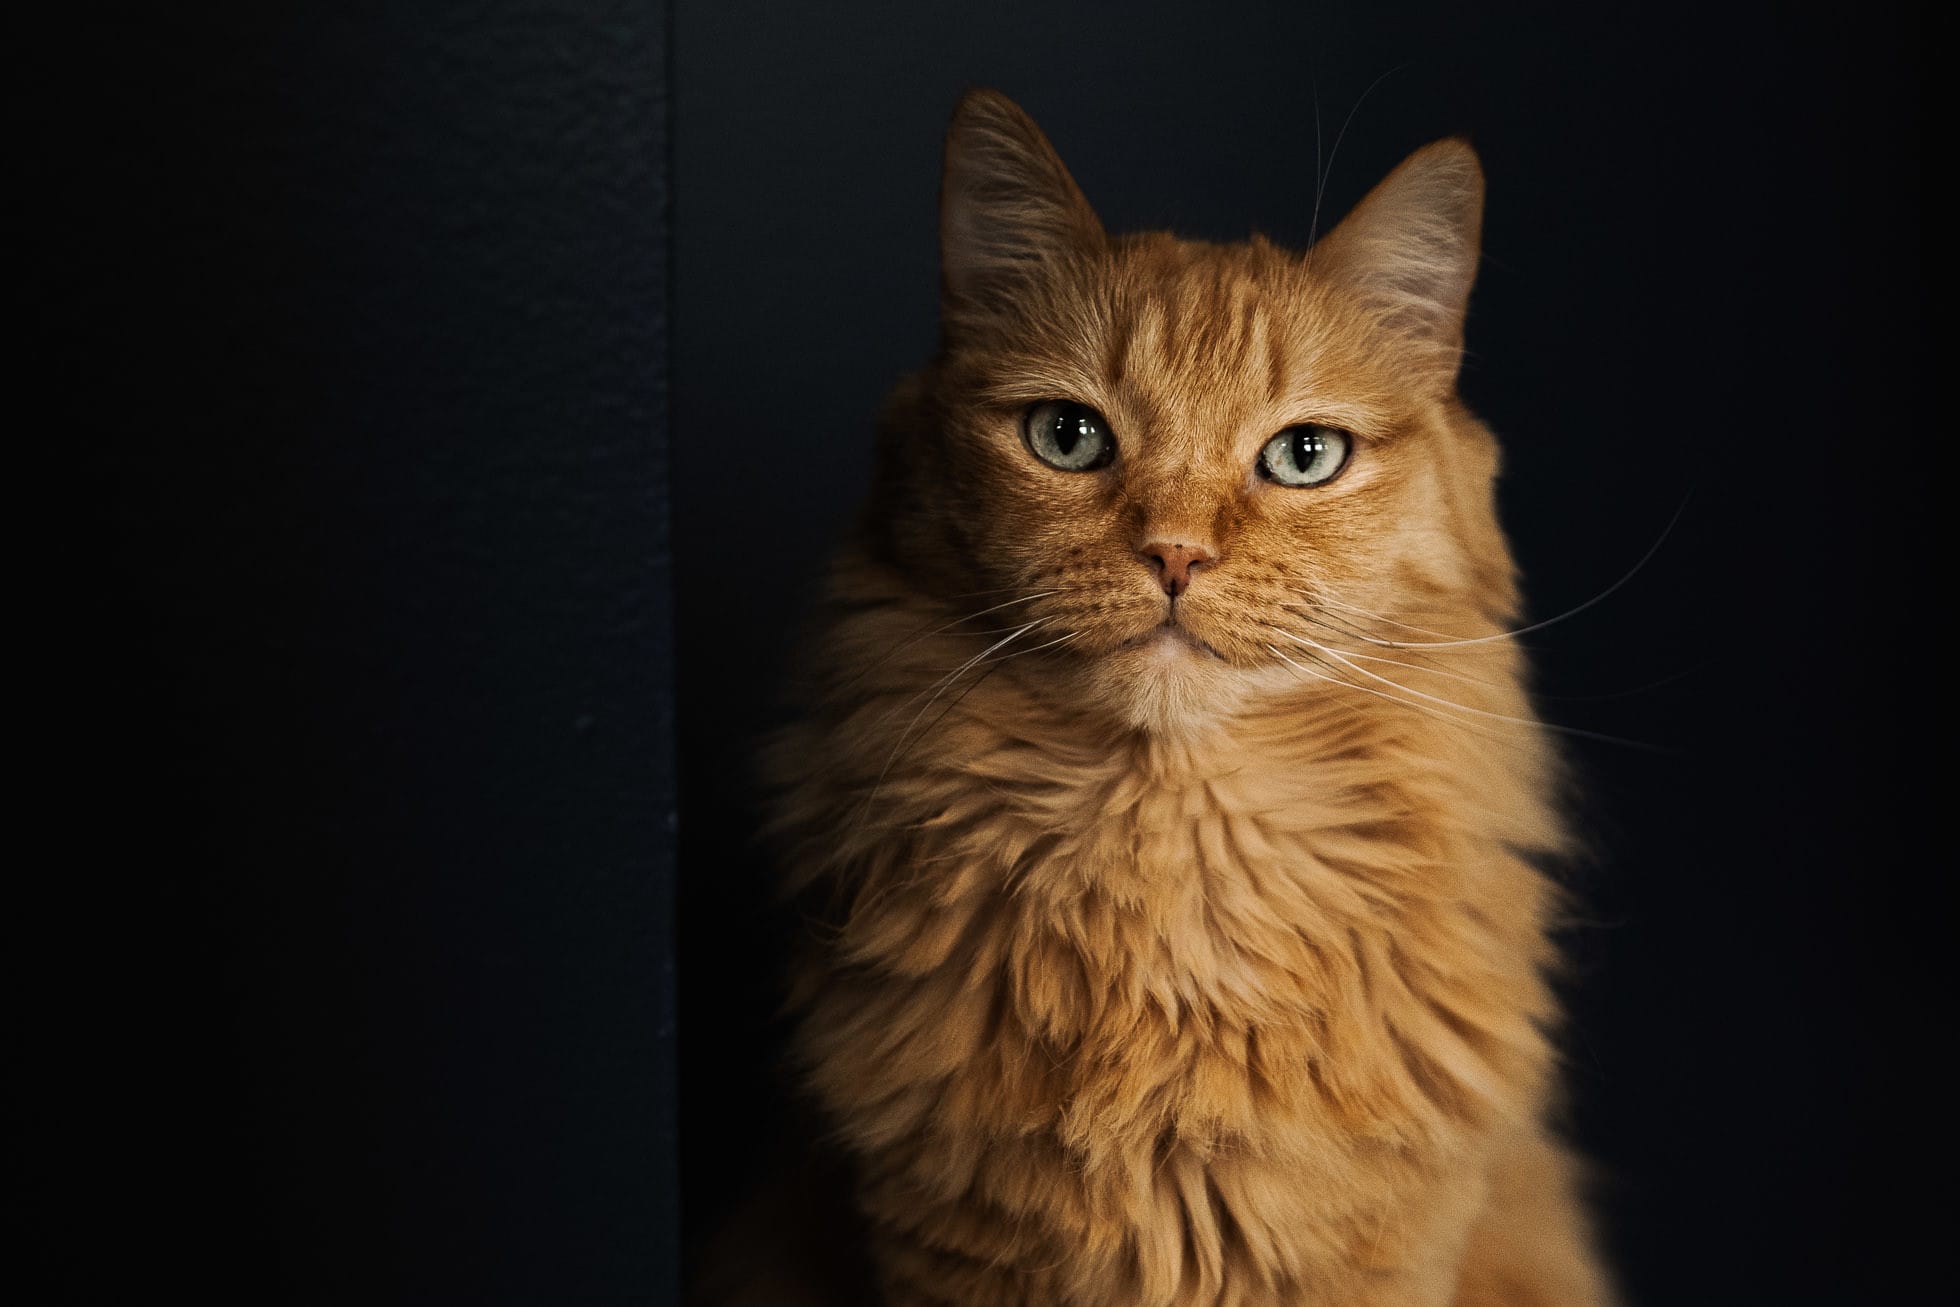 10 Orange Cat Breeds: A List of the Cutest And Friendly Orange Cats